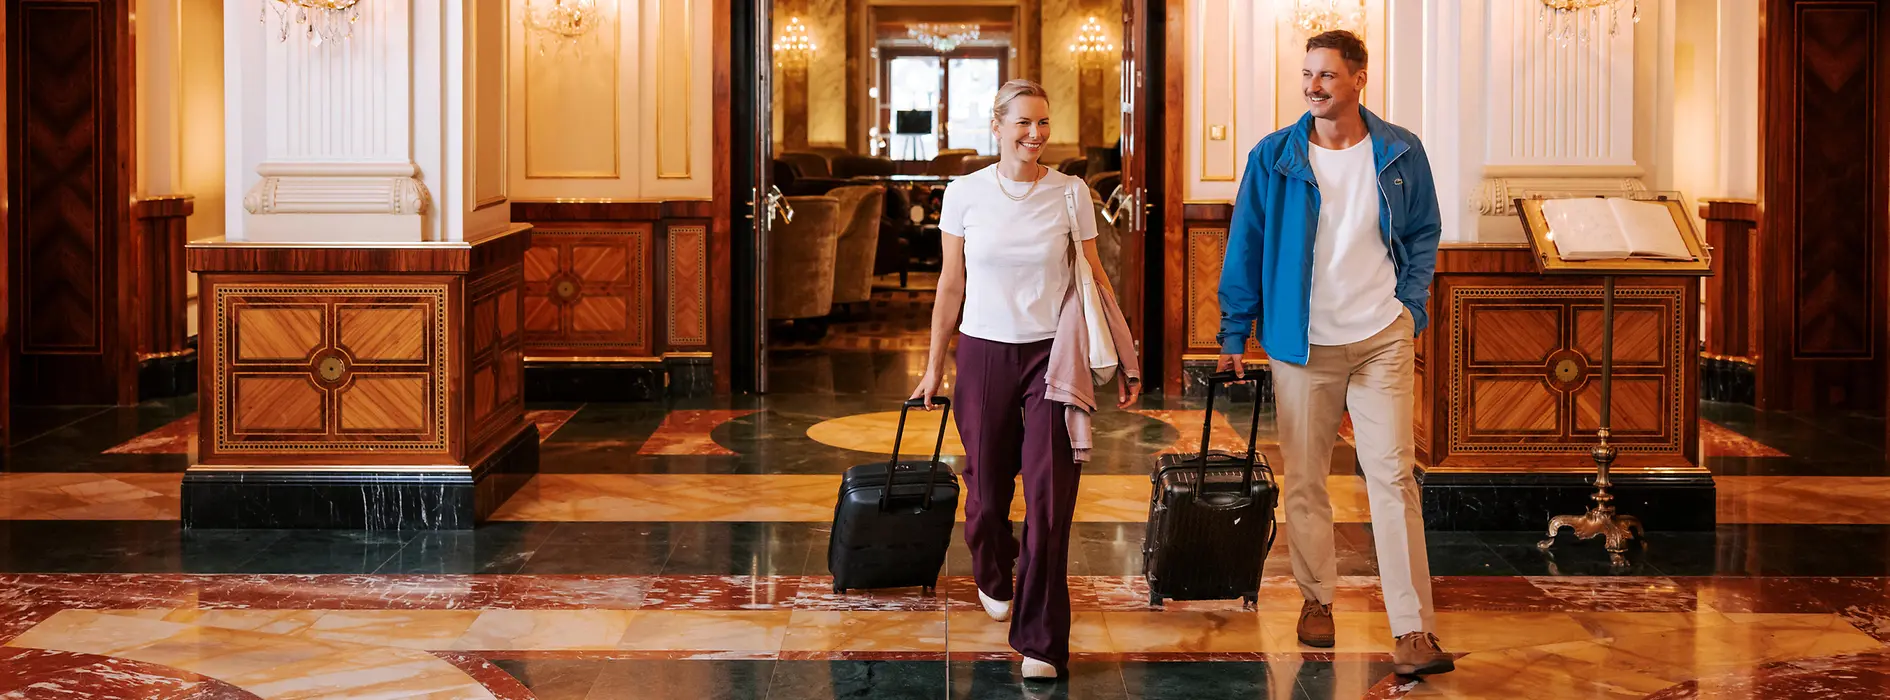 Two women with luggage in a Viennese hotel